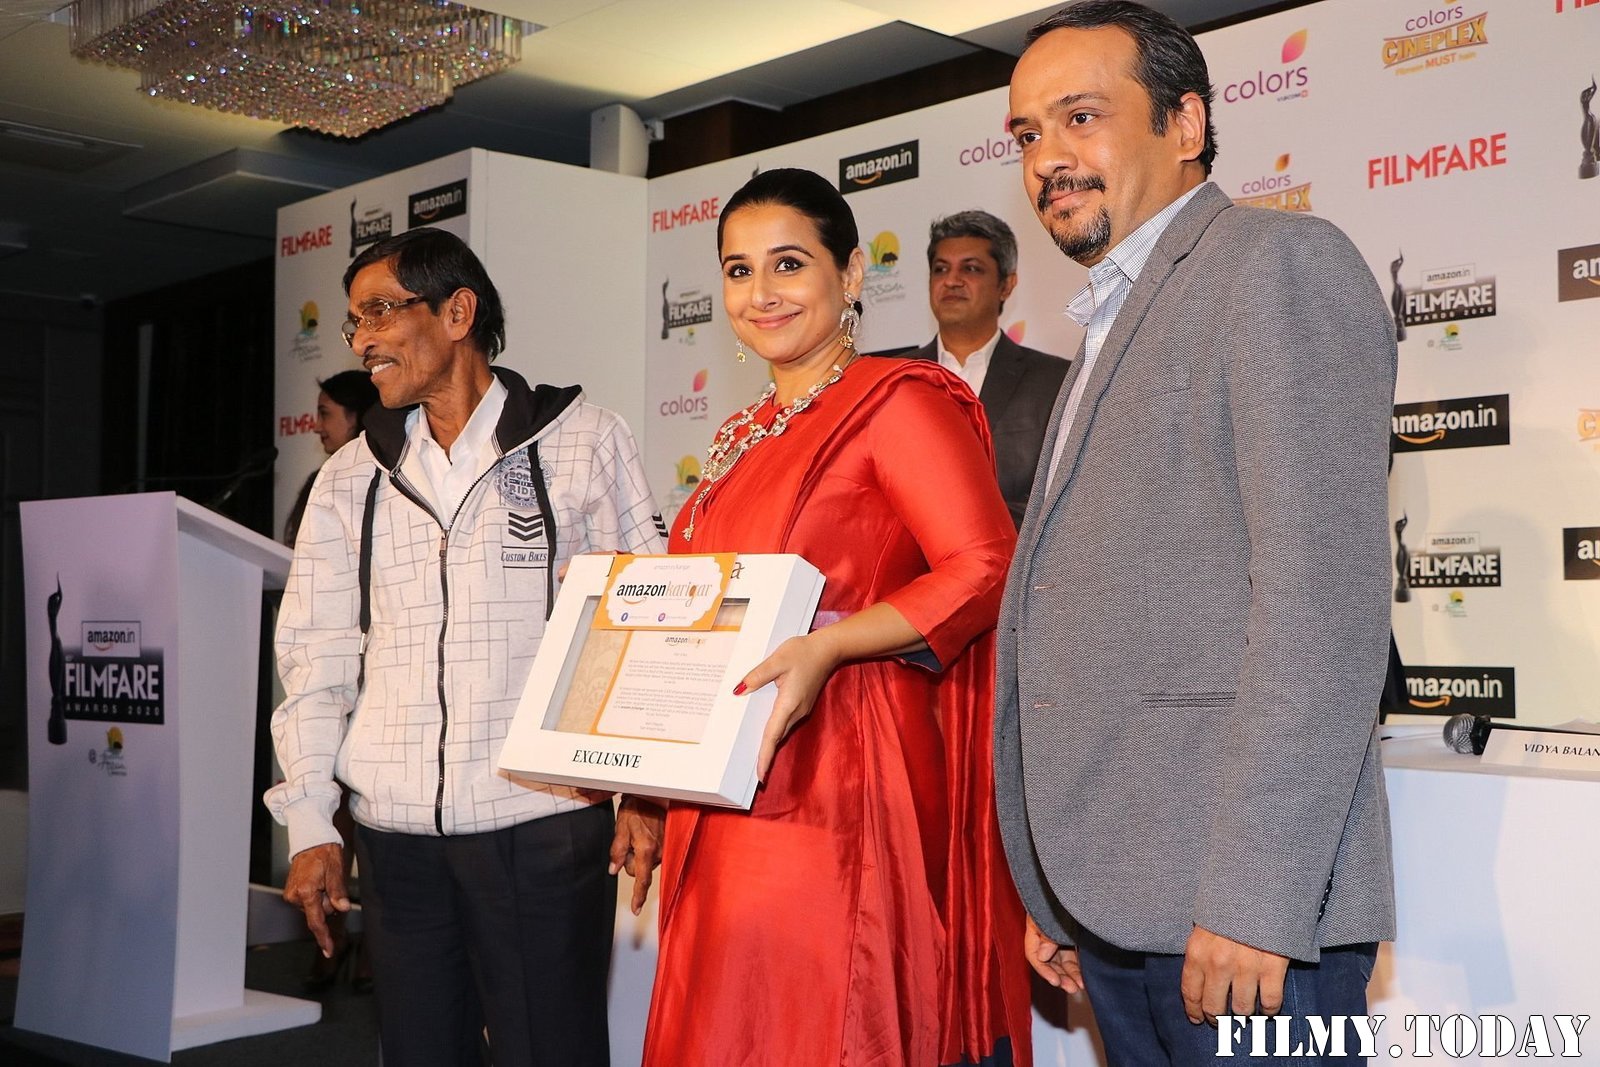 Photos: Amazon Filmfare Awards 2020 Press Conference At Juhu | Picture 1718863